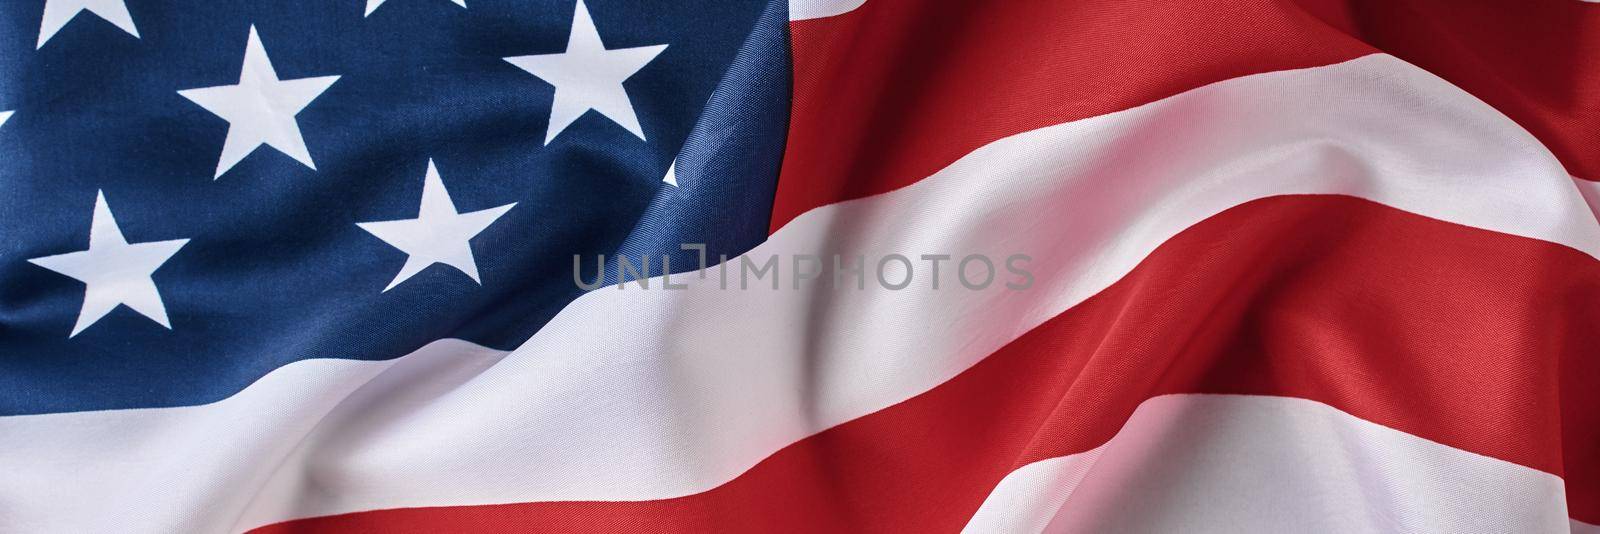 American flag as background. USA flag waving, long banner by Lazy_Bear